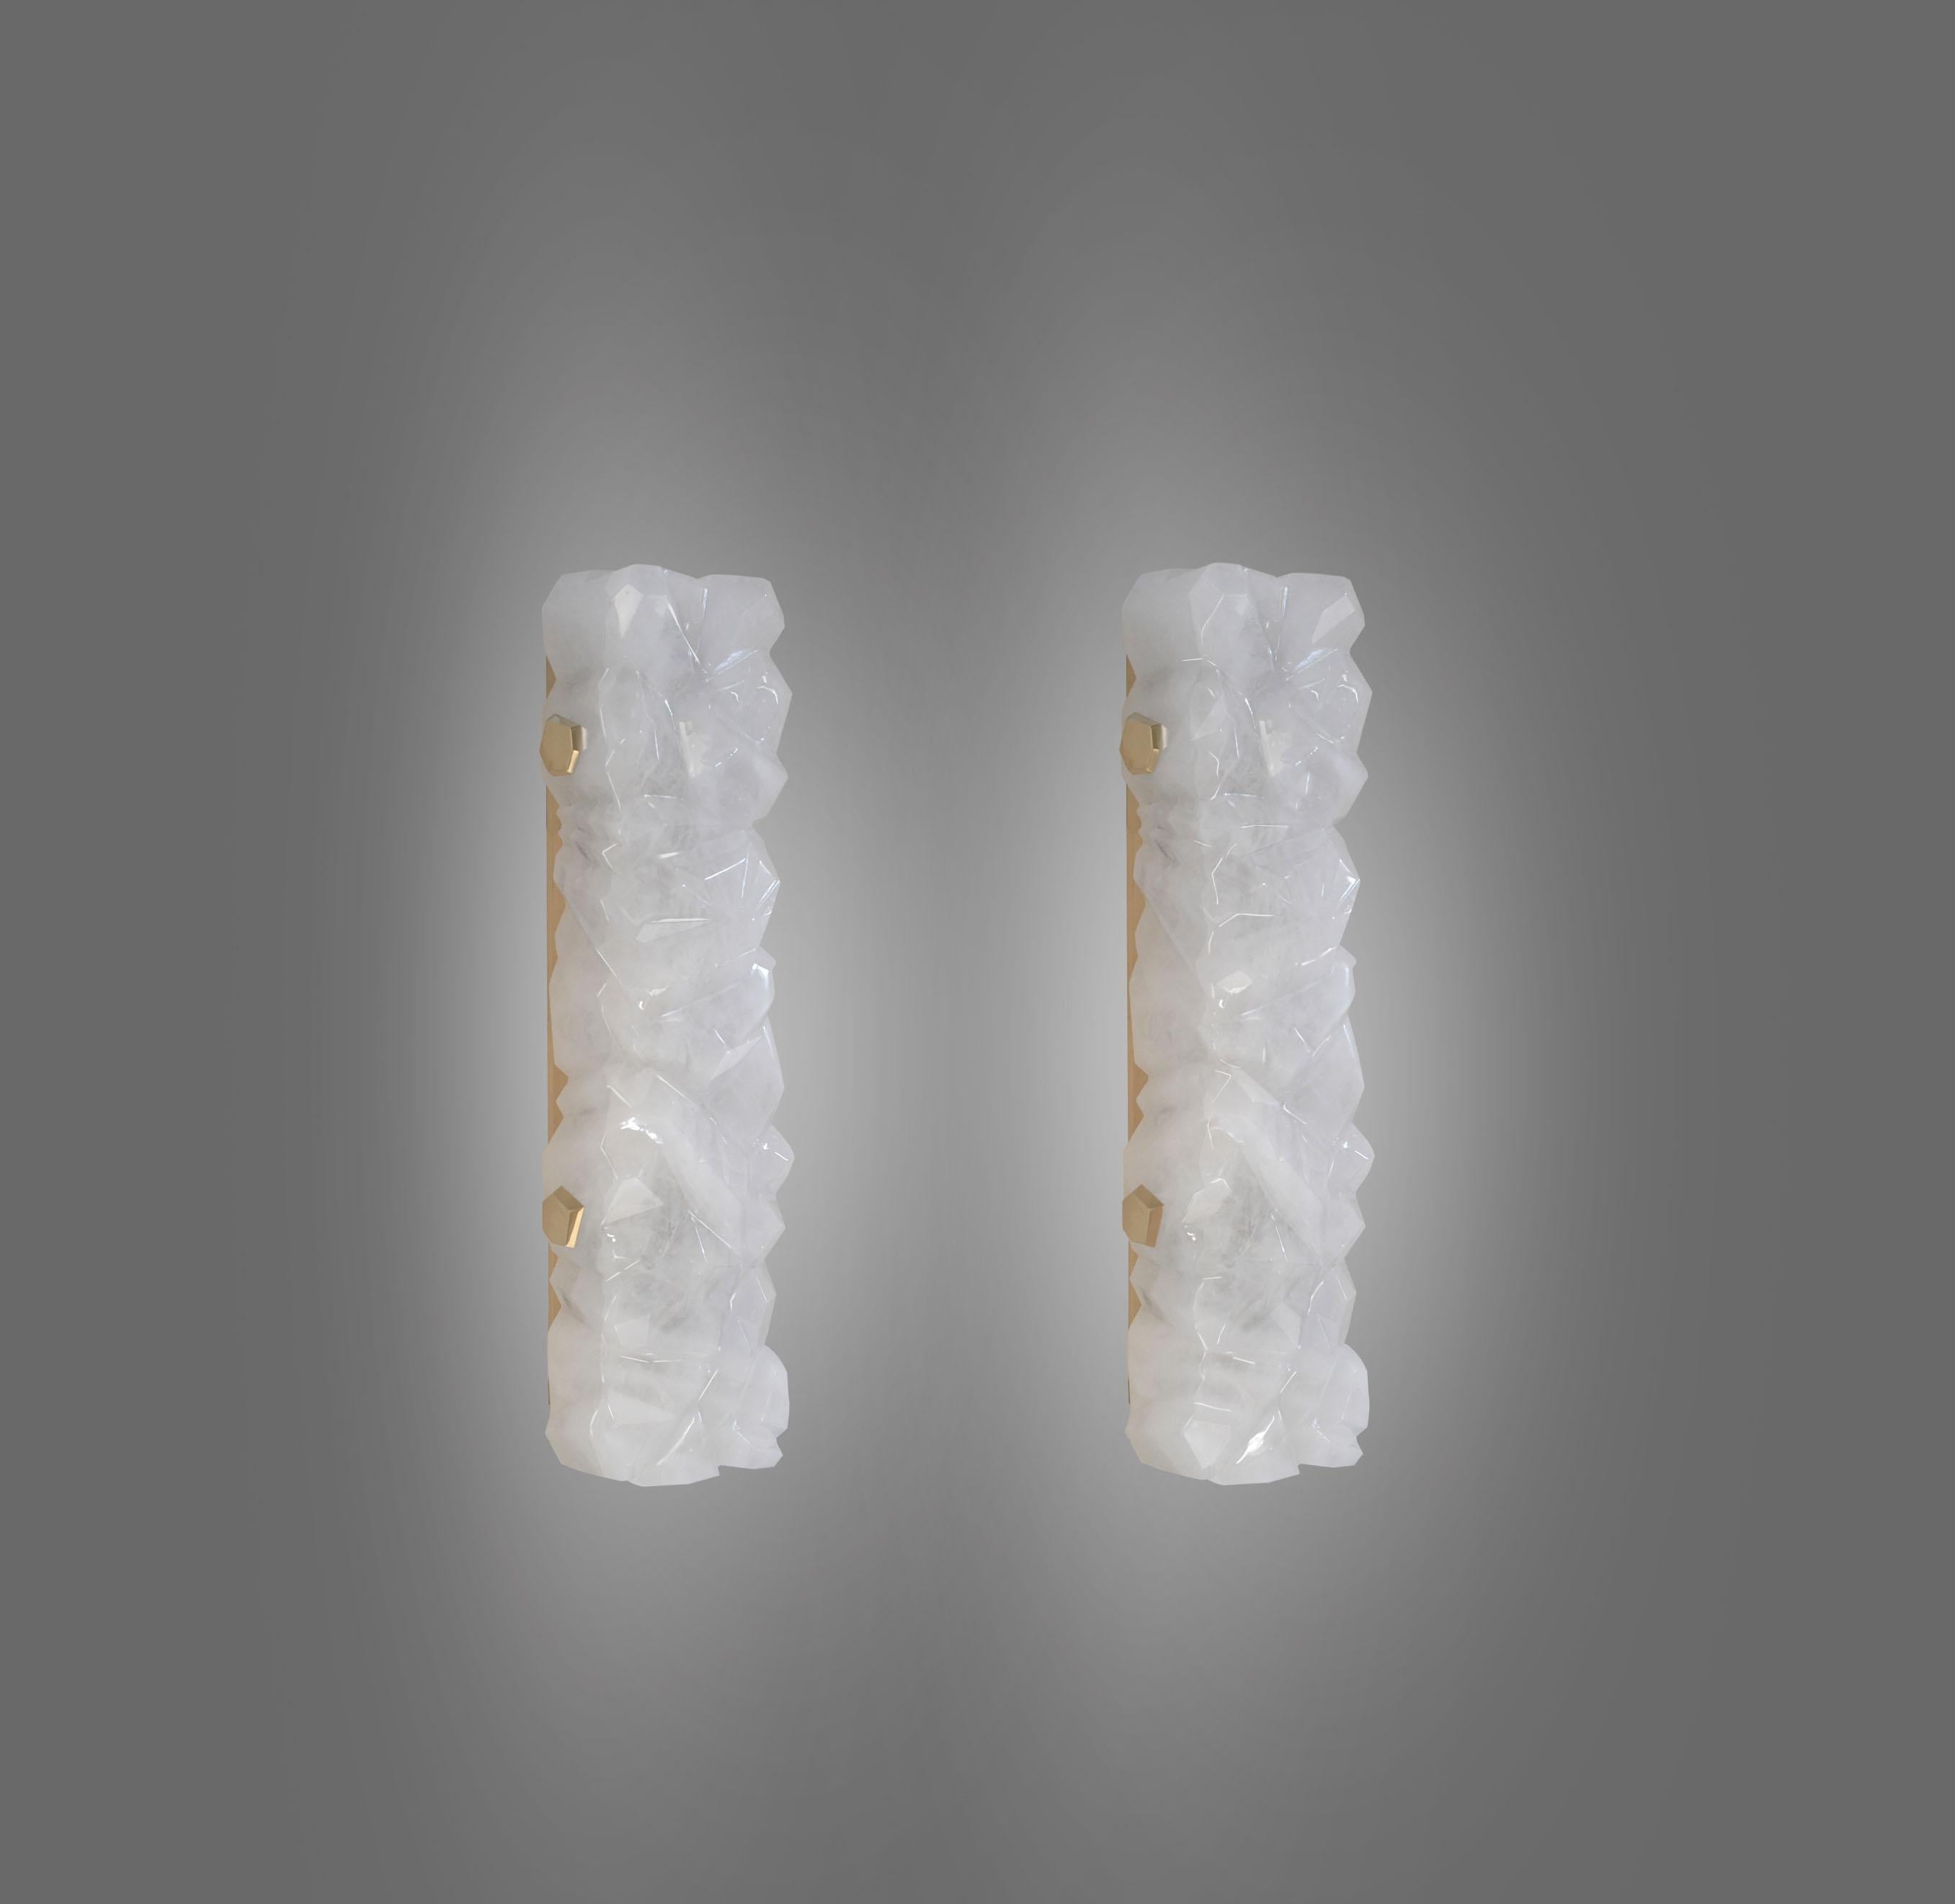 Tall pair of fine carved multifaceted abstract form rock crystal sconces with polish brass decoration. Created by Phoenix Gallery, NYC.
Metal finish, size, and quantity upon request.